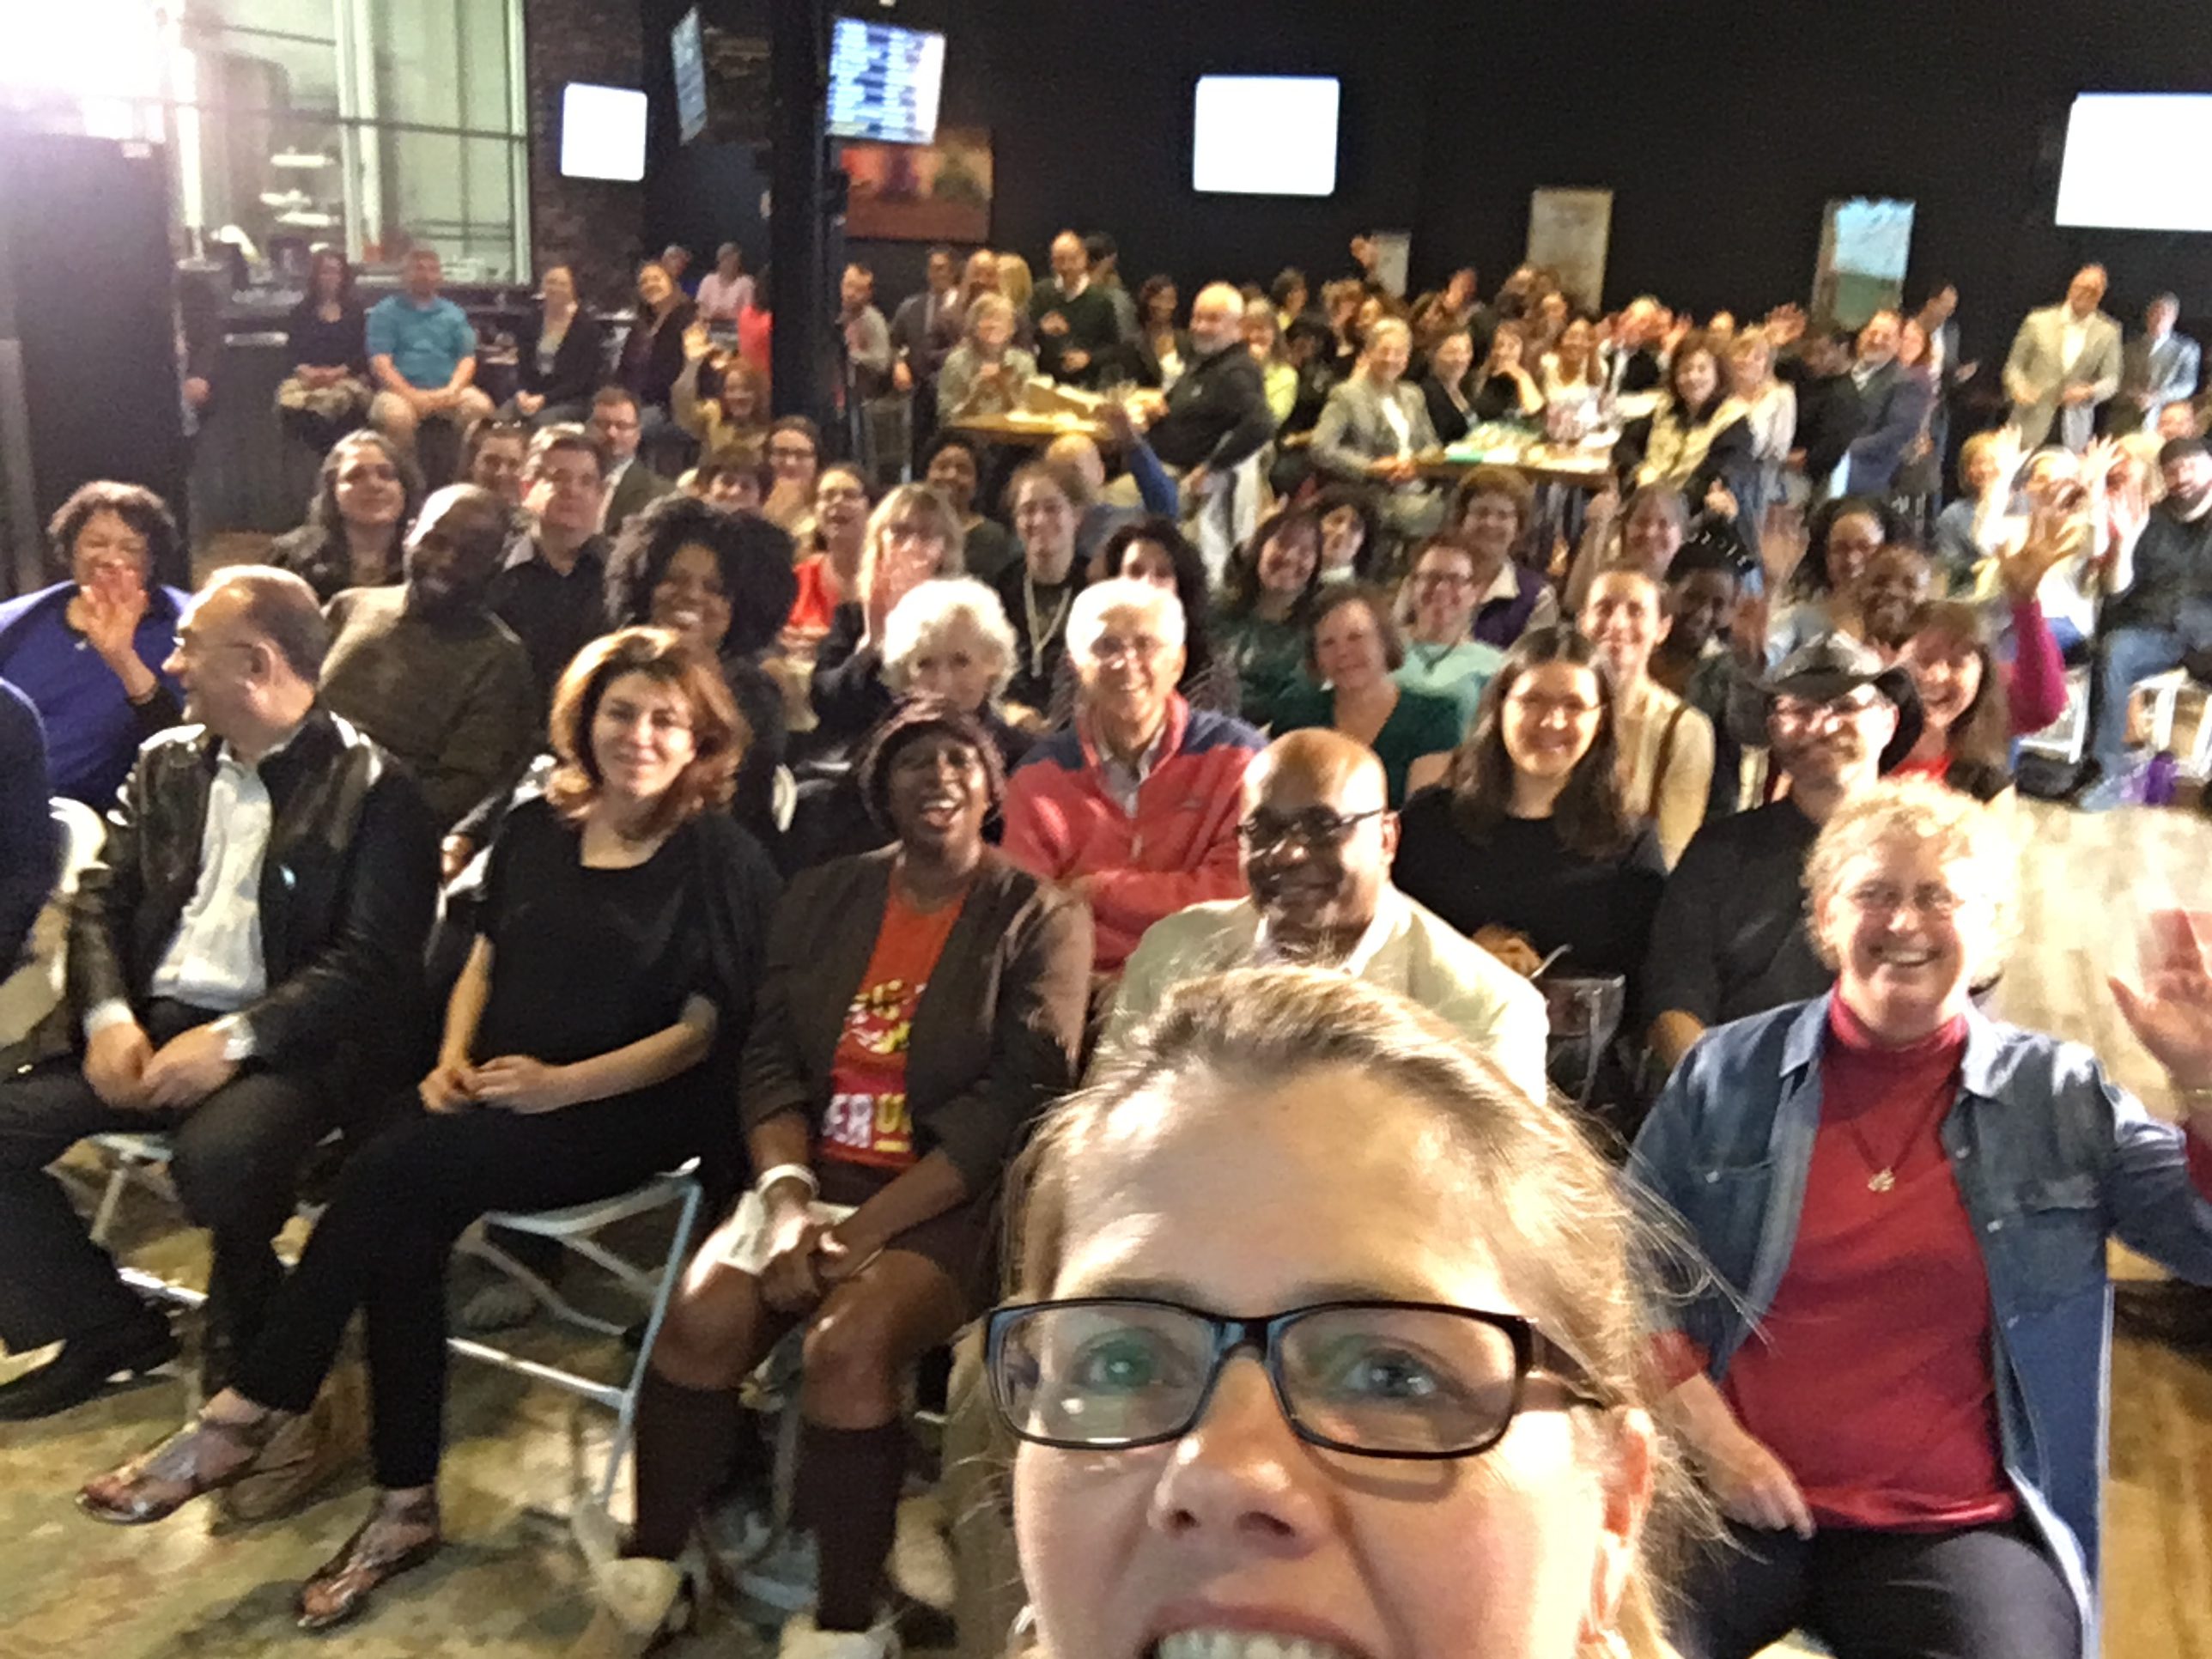 Ignite speaker Wendy Baird takes a selfie with the crowd